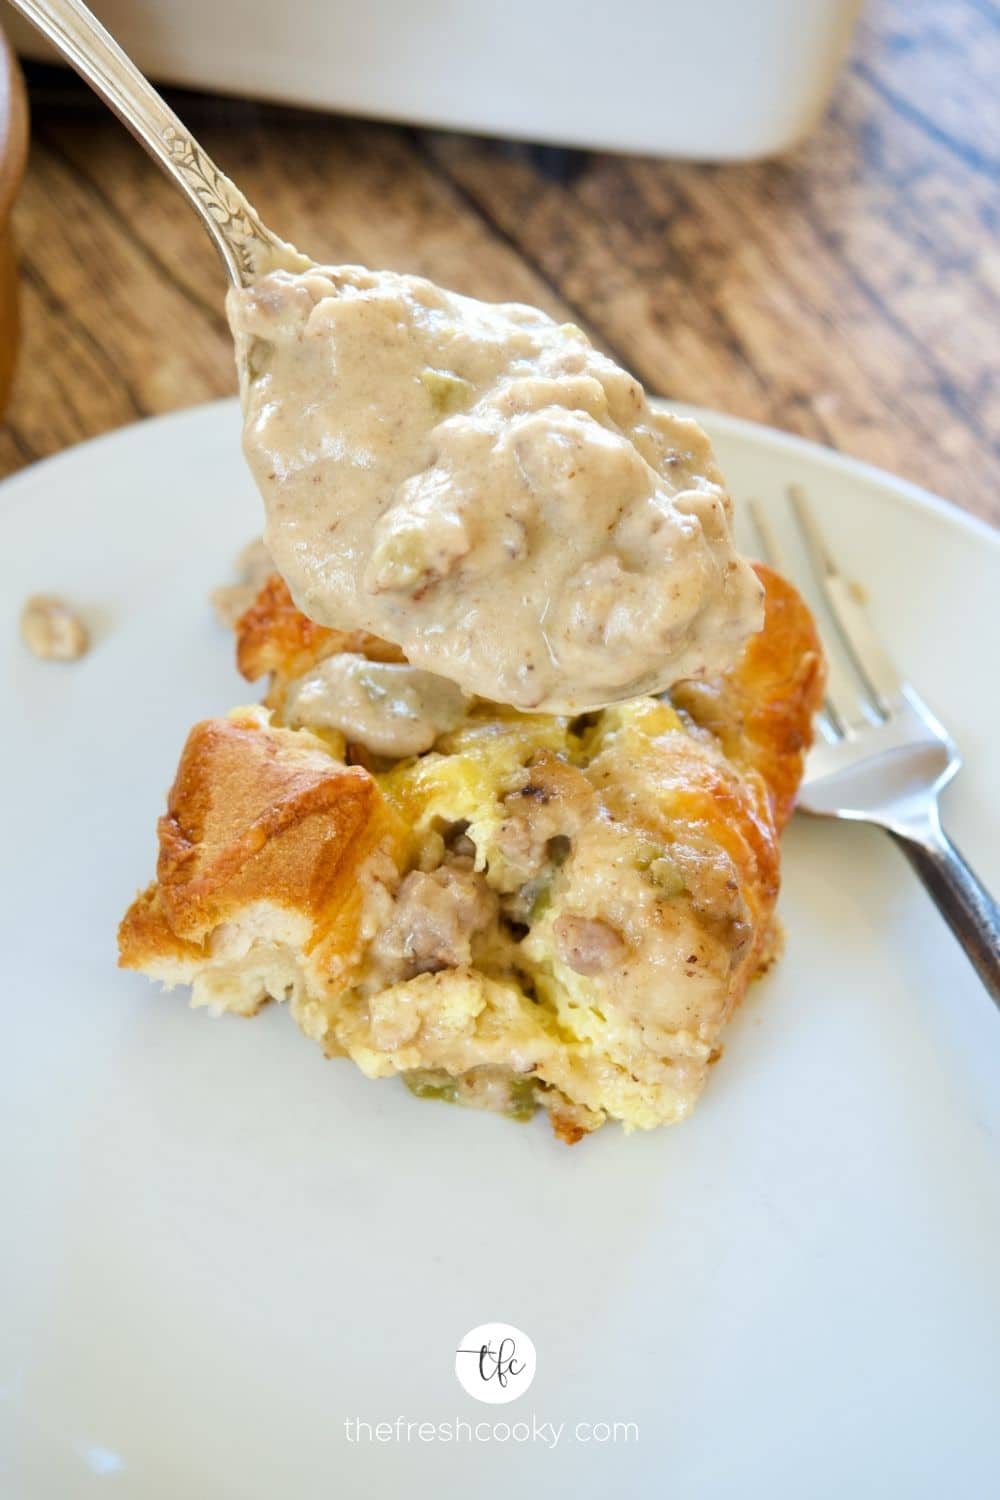 Spooning sausage gravy over a slice of biscuits and gravy egg bake.